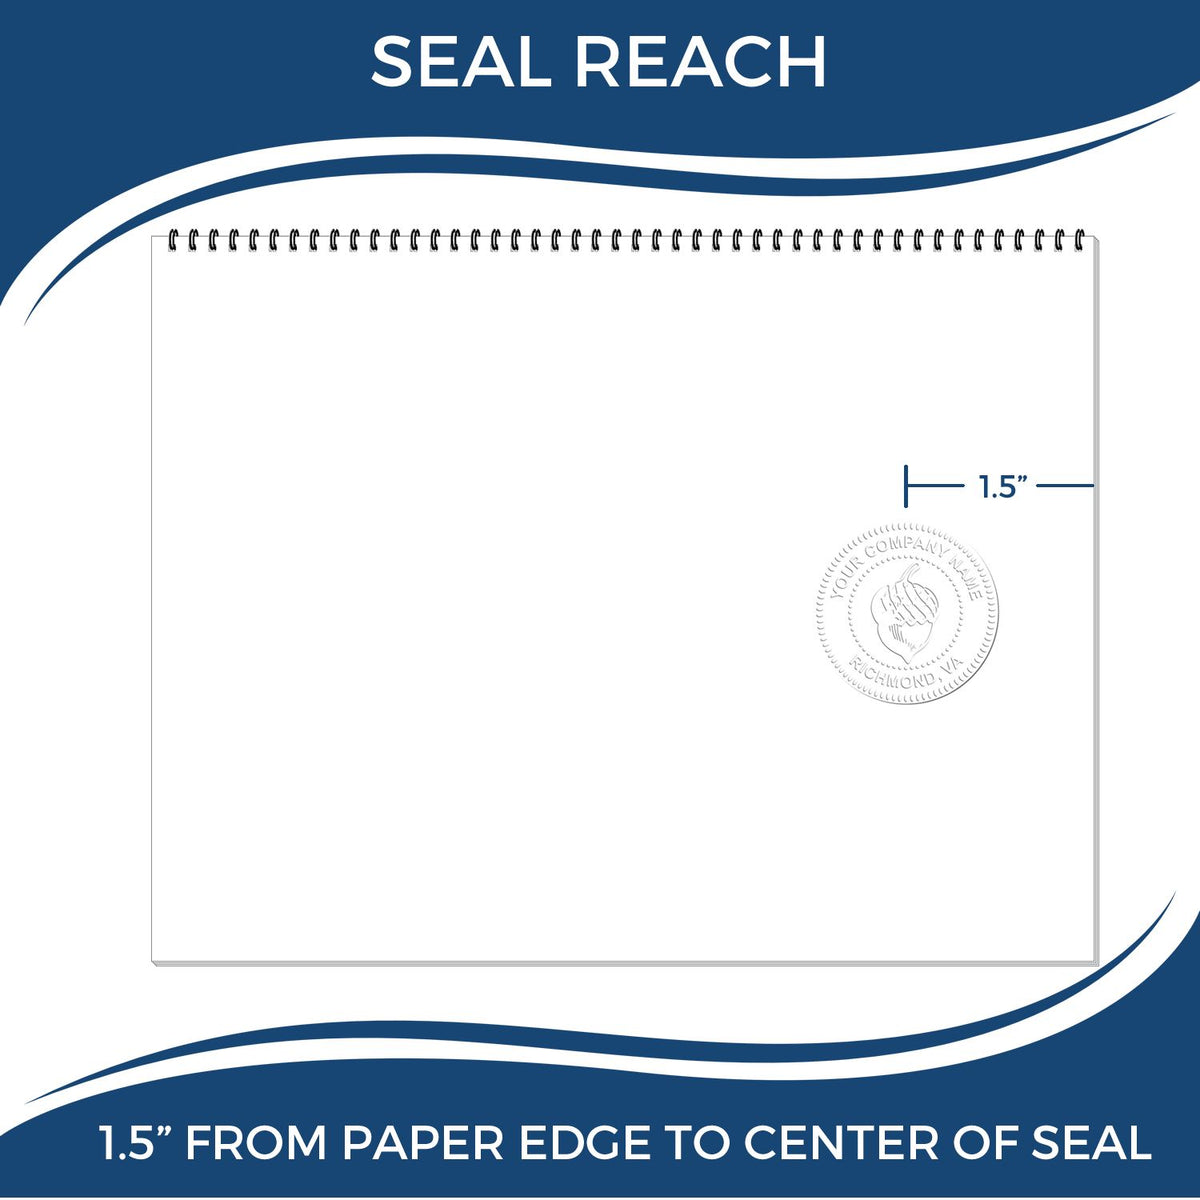 An infographic showing the seal reach which is represented by a ruler and a miniature seal image of the Gift South Carolina Geologist Seal